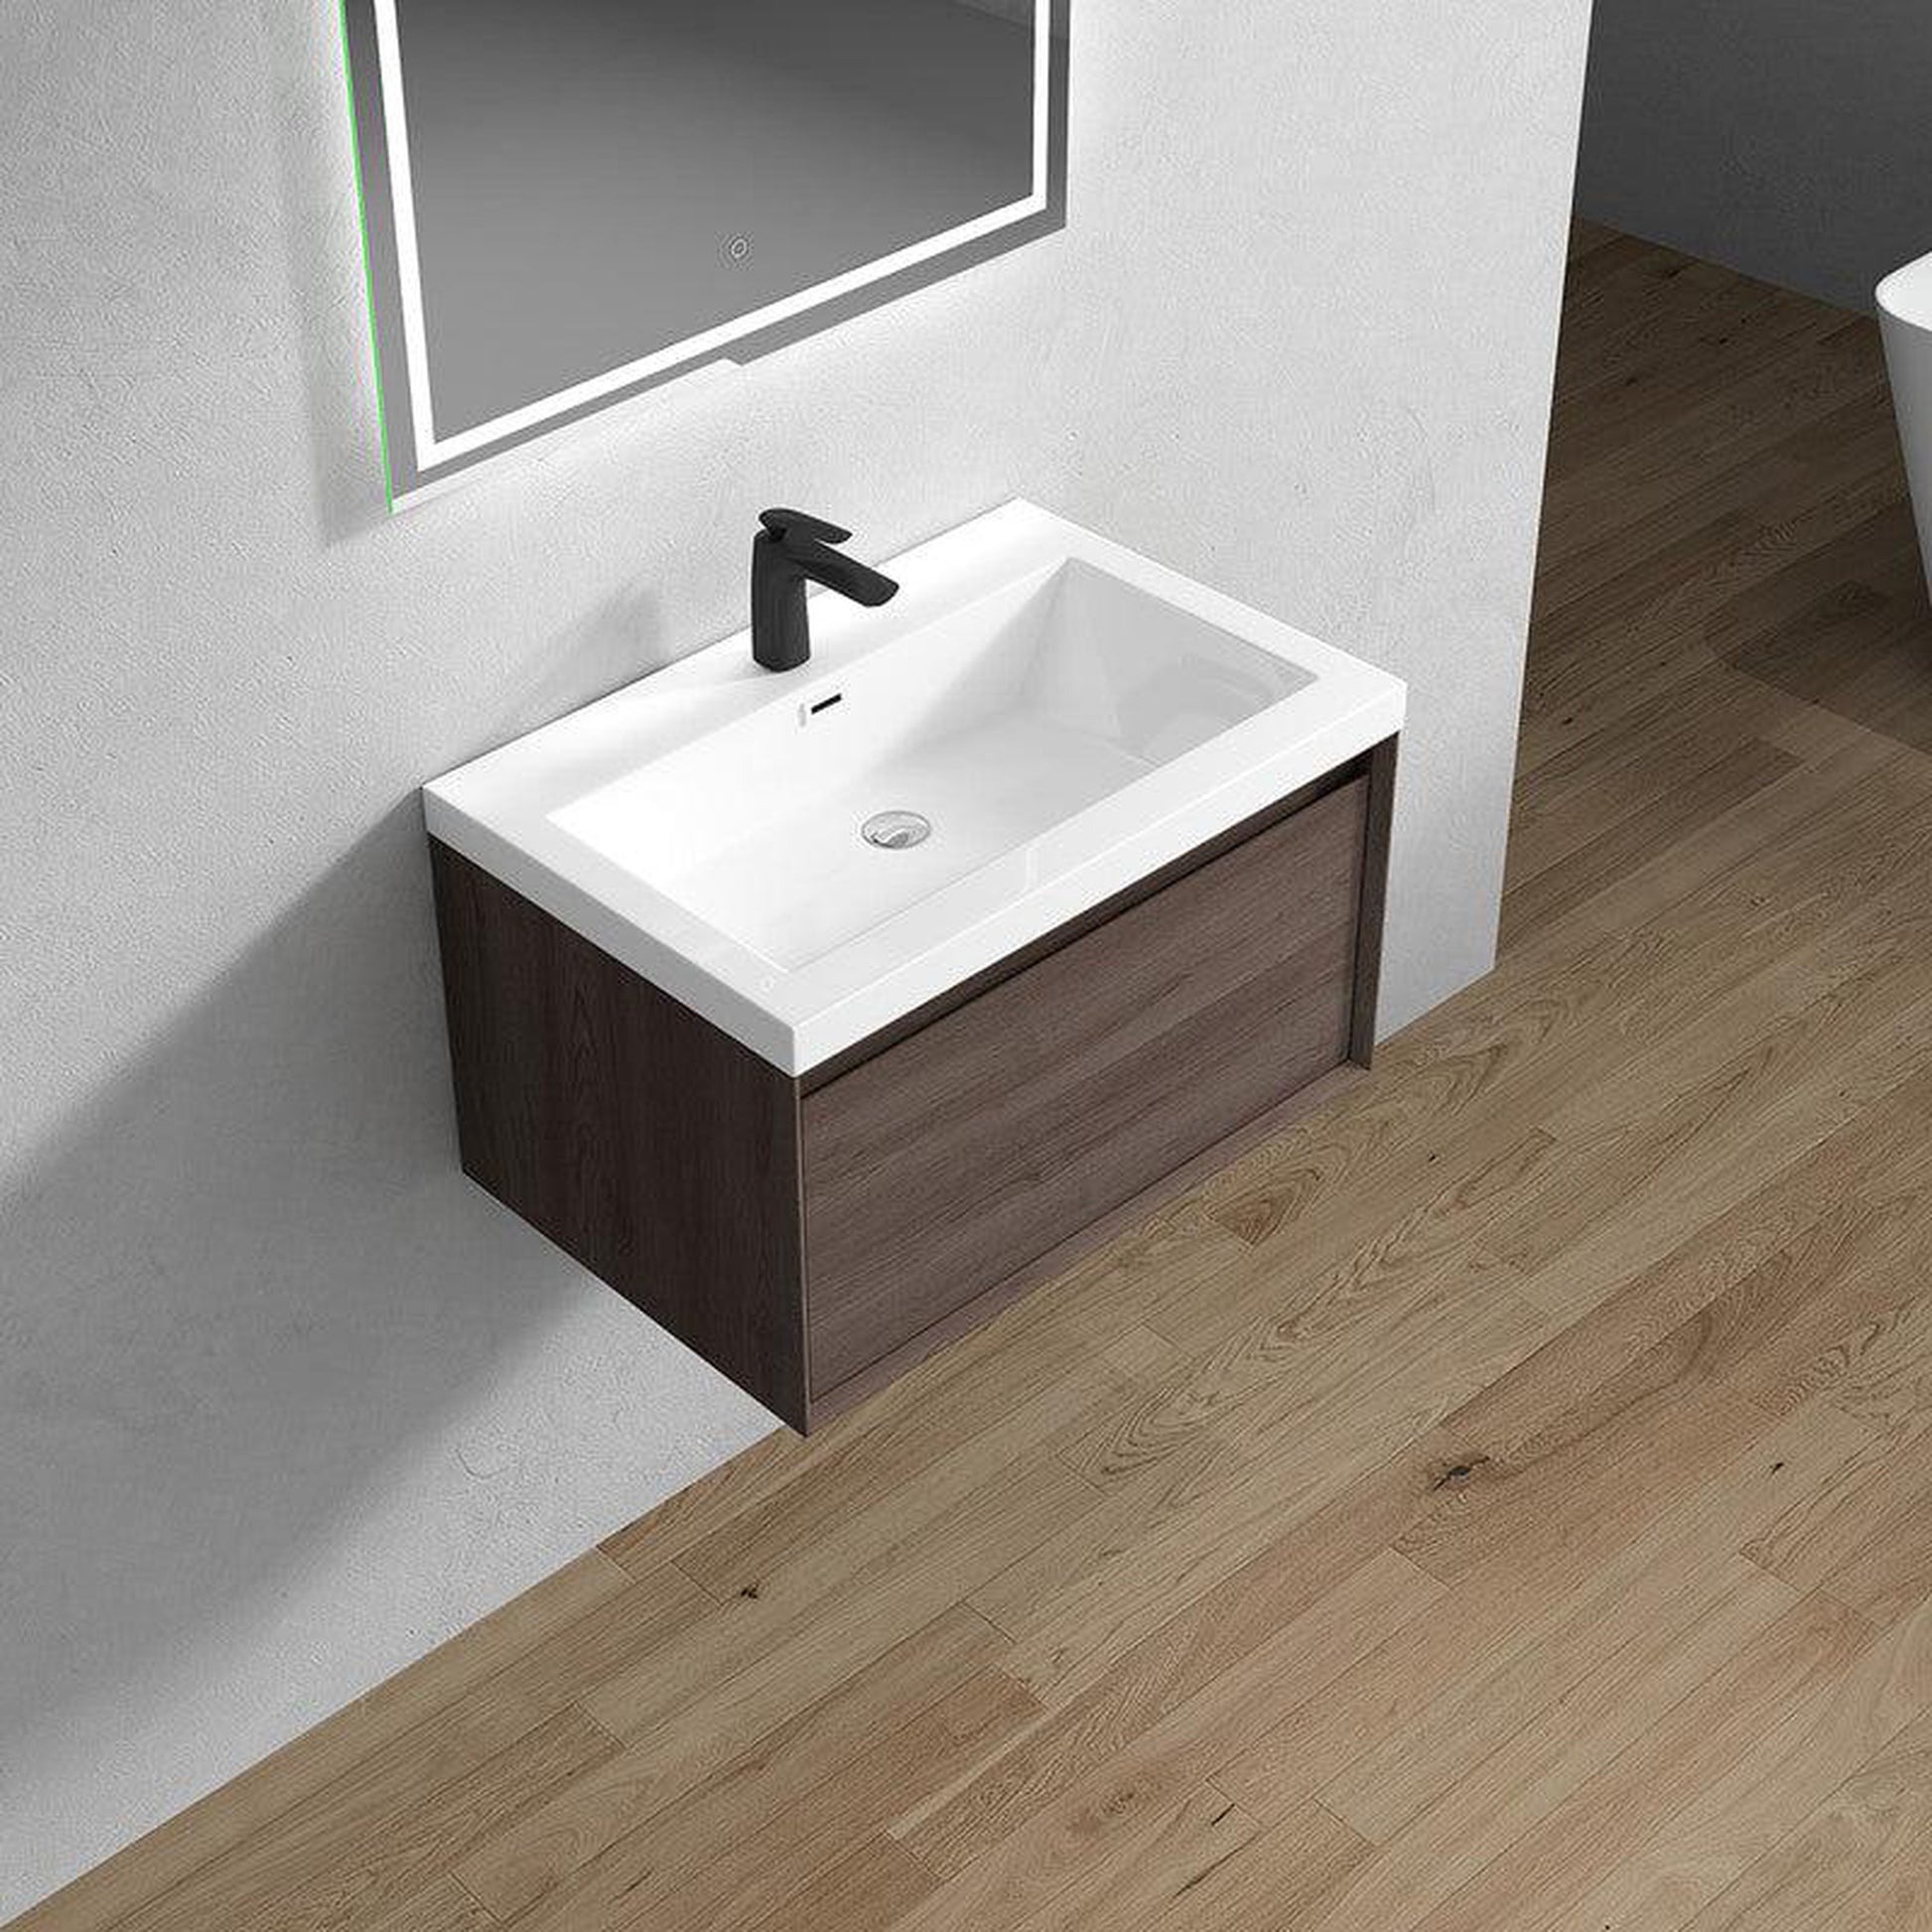 Moreno Bath BELLA 30" Red Oak Wall-Mounted Vanity With Single Reinforced White Acrylic Sink